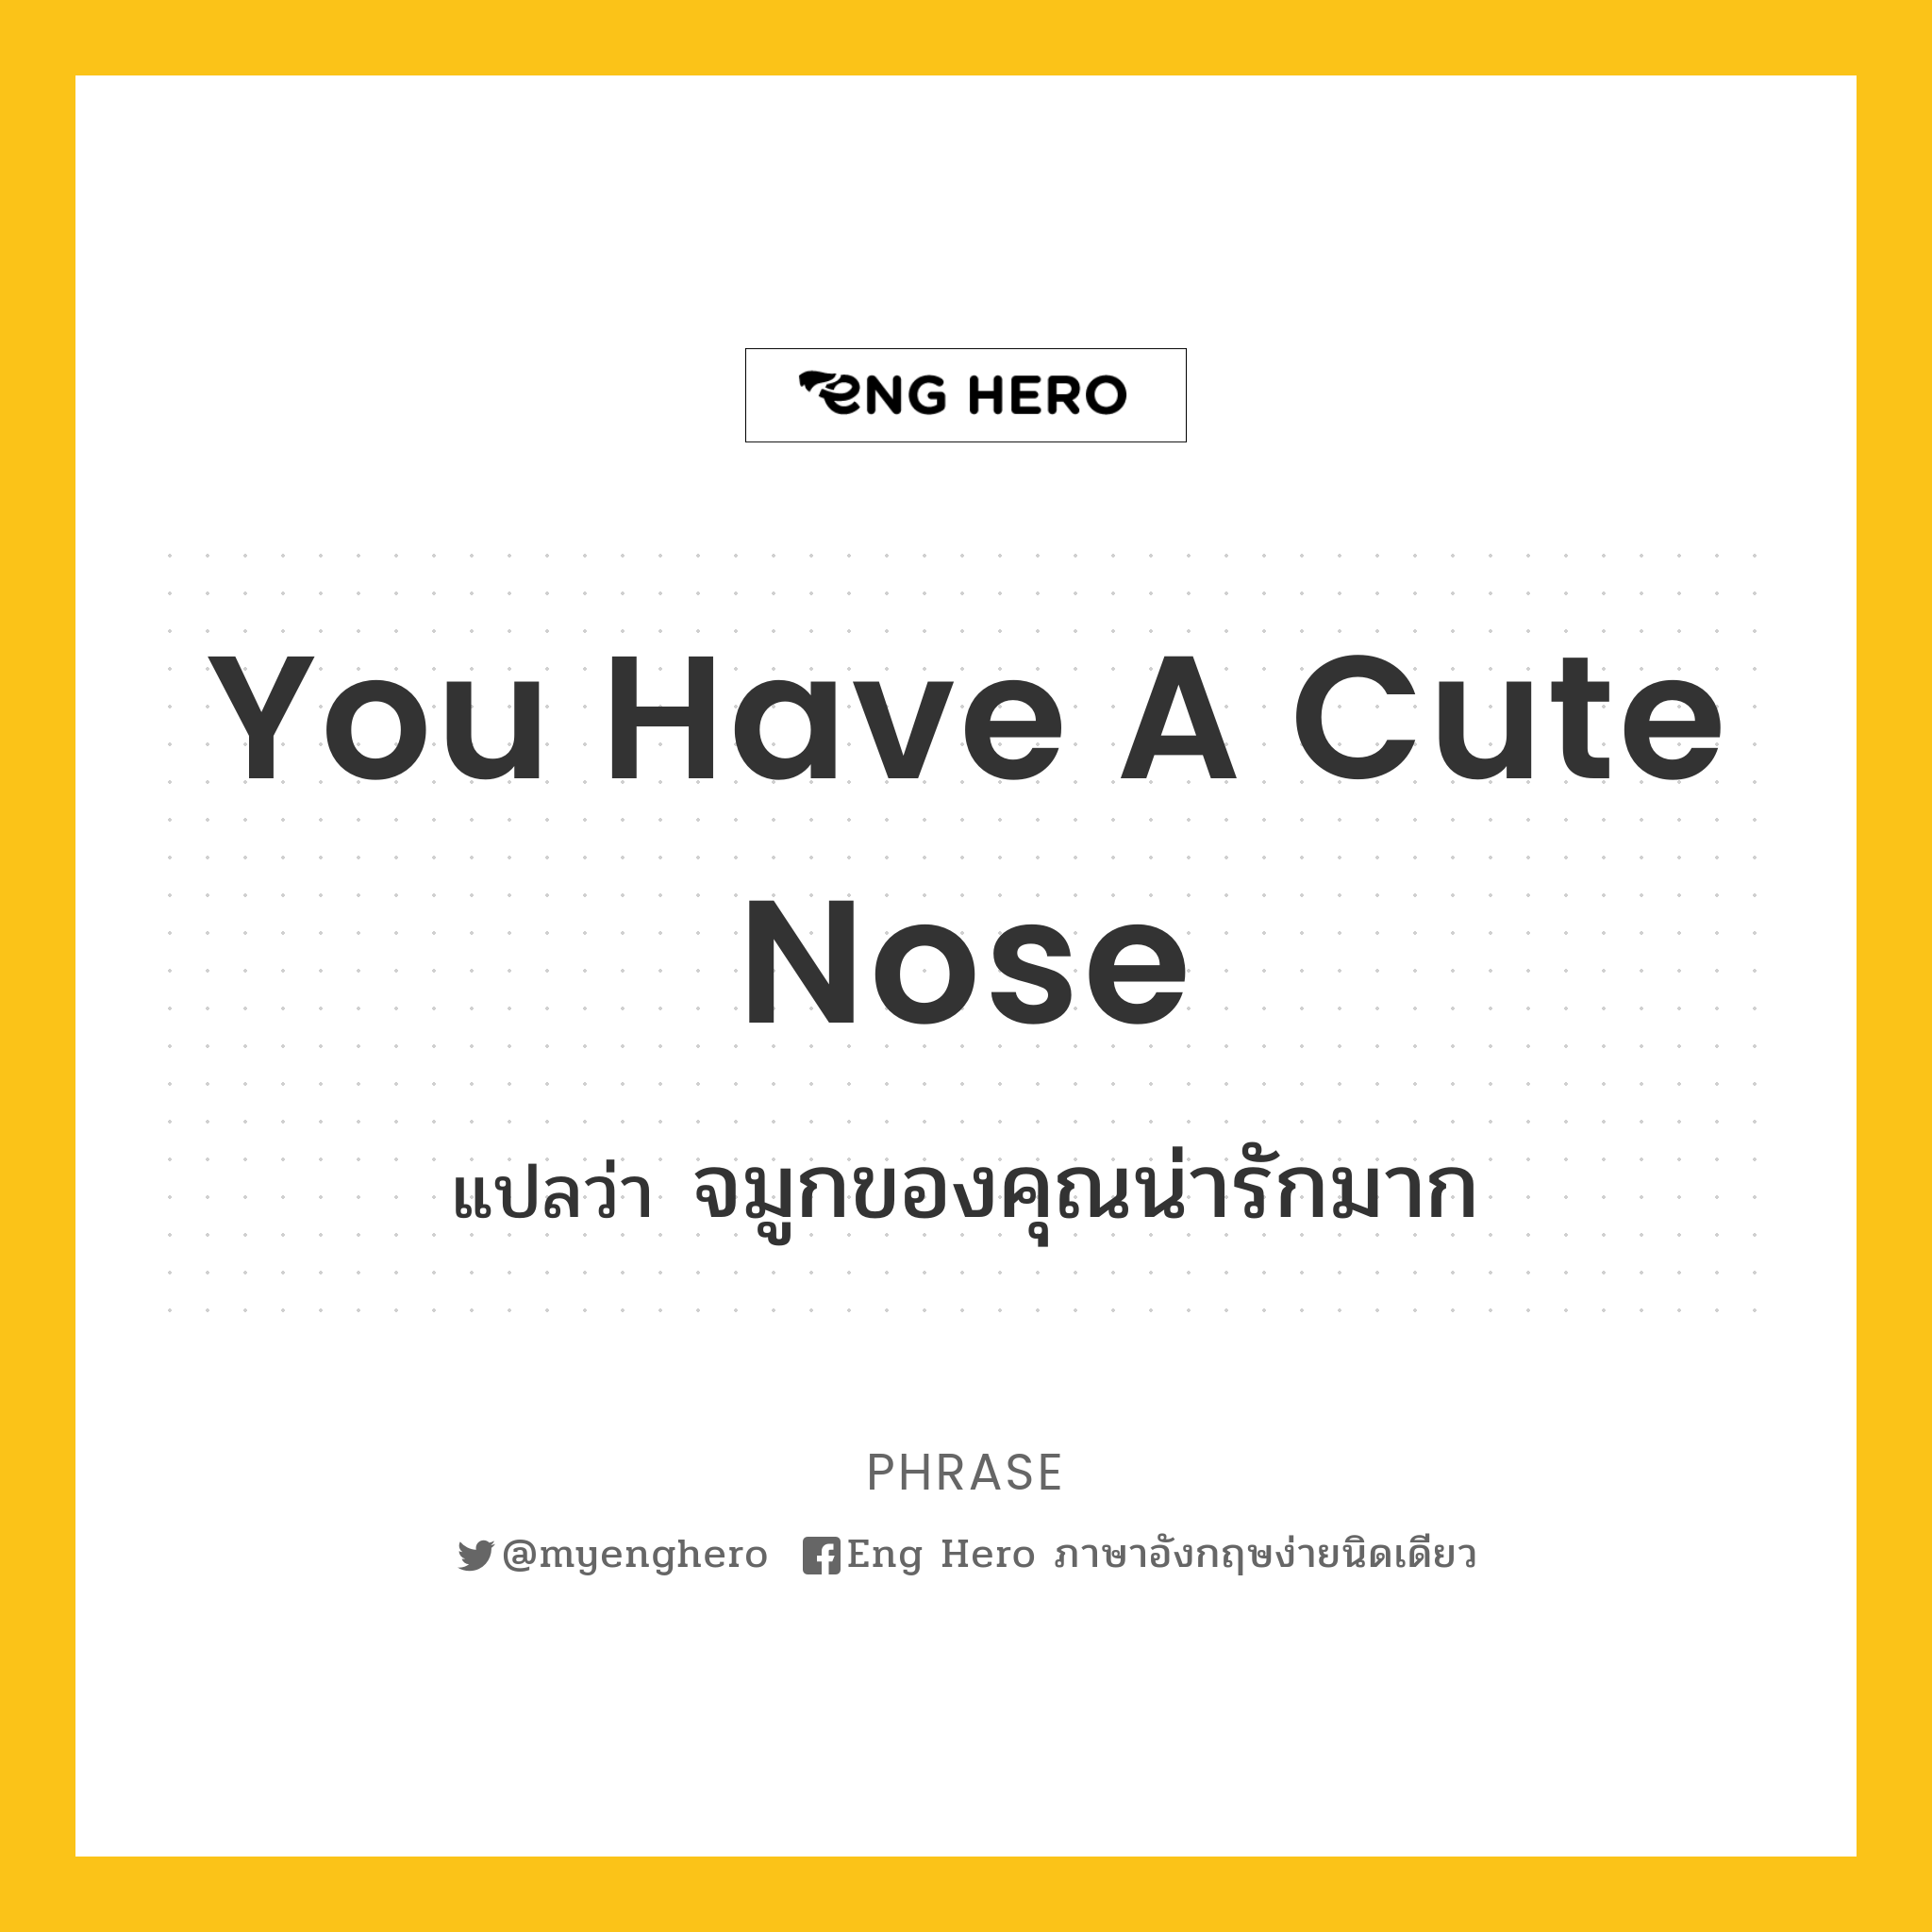 You have a cute nose